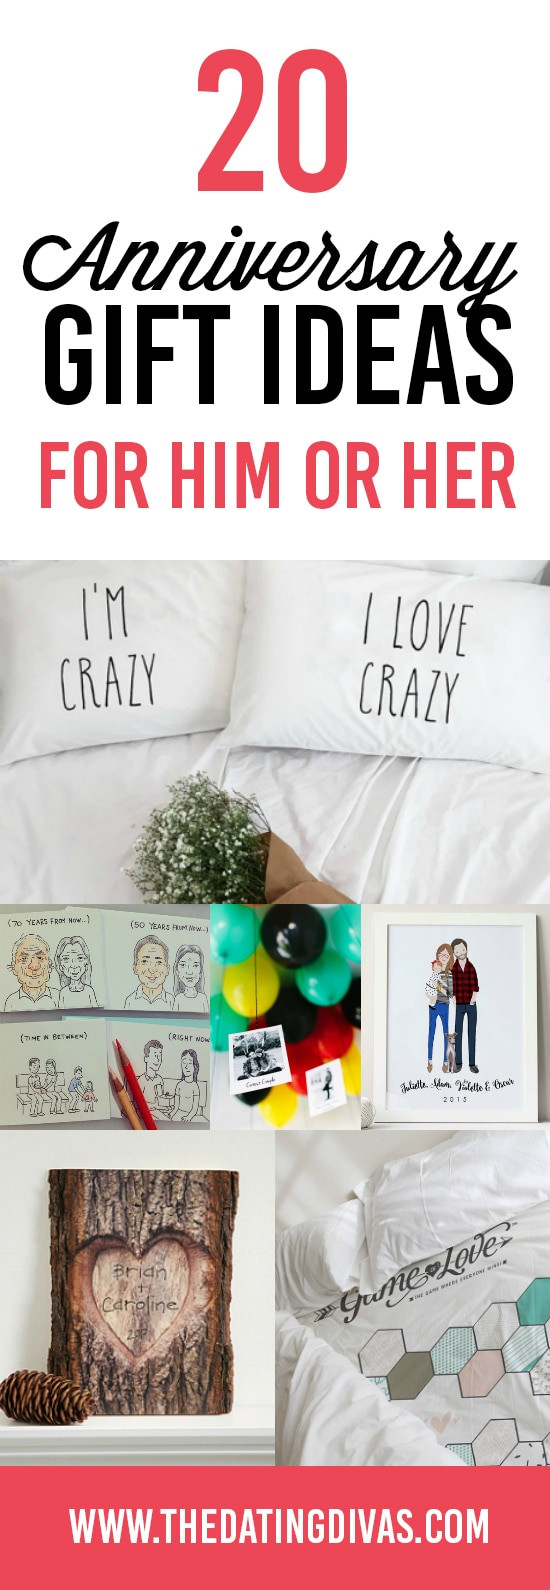 2 Year Dating Anniversary Gift Ideas For Her
 Anniversary Gift Ideas